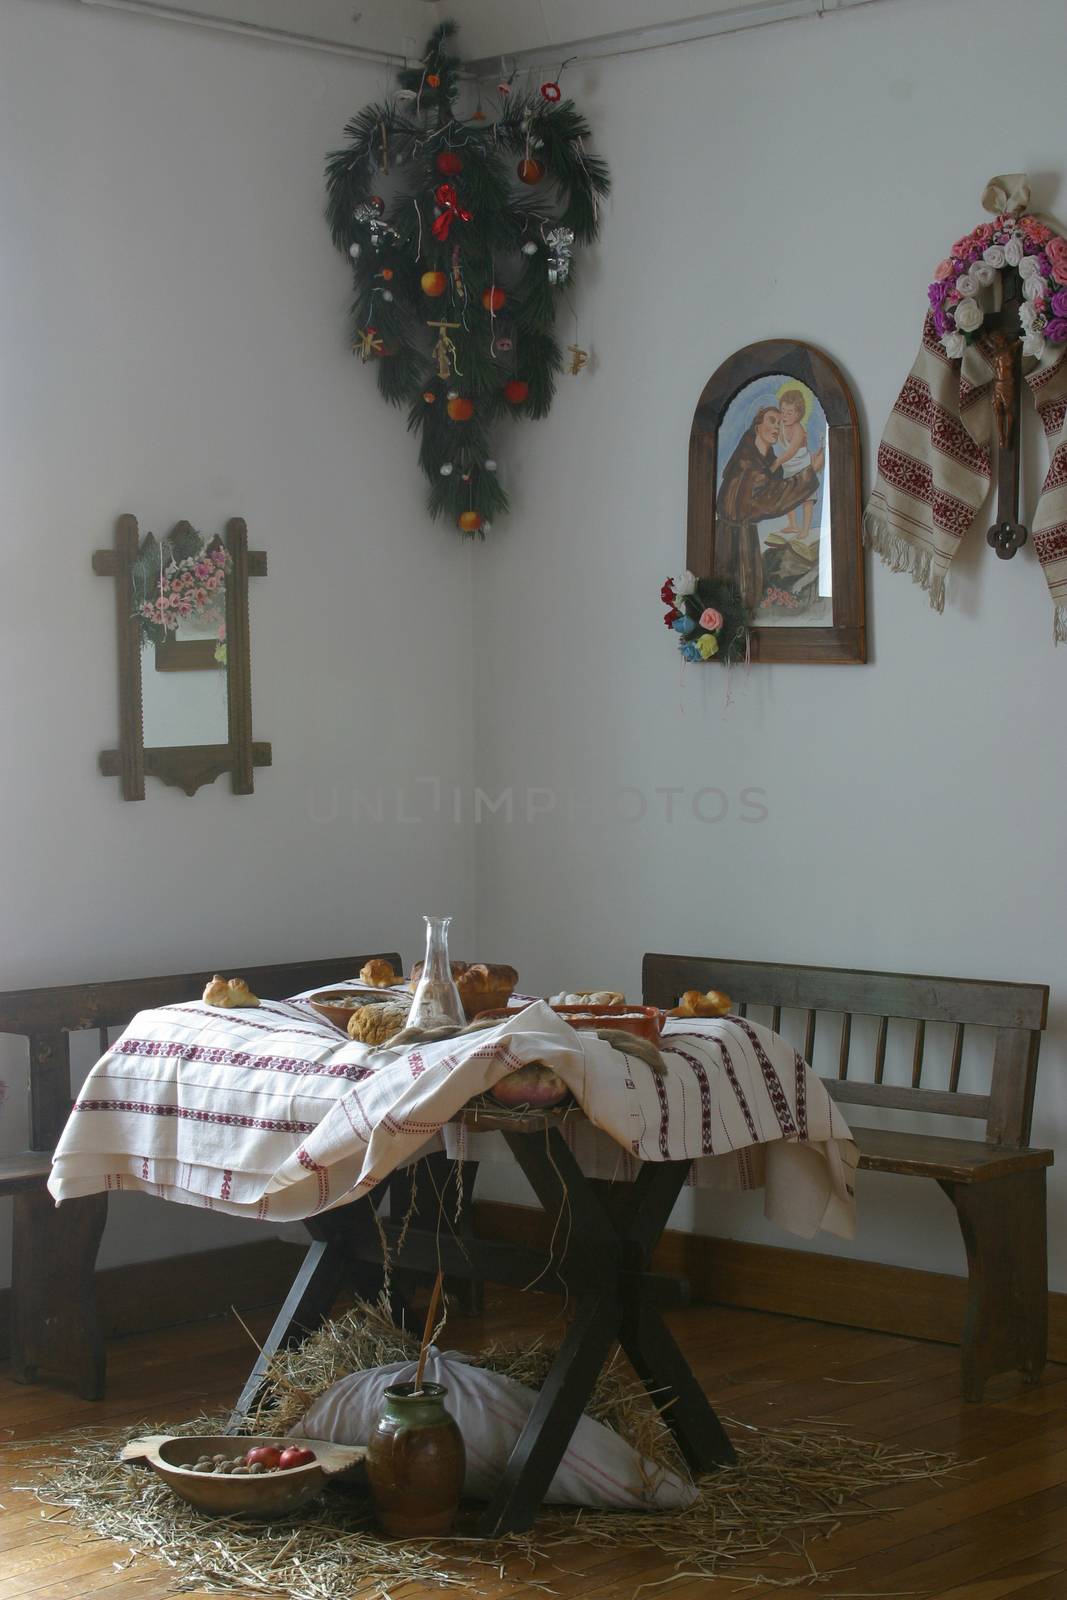 A nice dining table set for Christmas dinner in old countryhouse, central Europe -Croatia by atlas